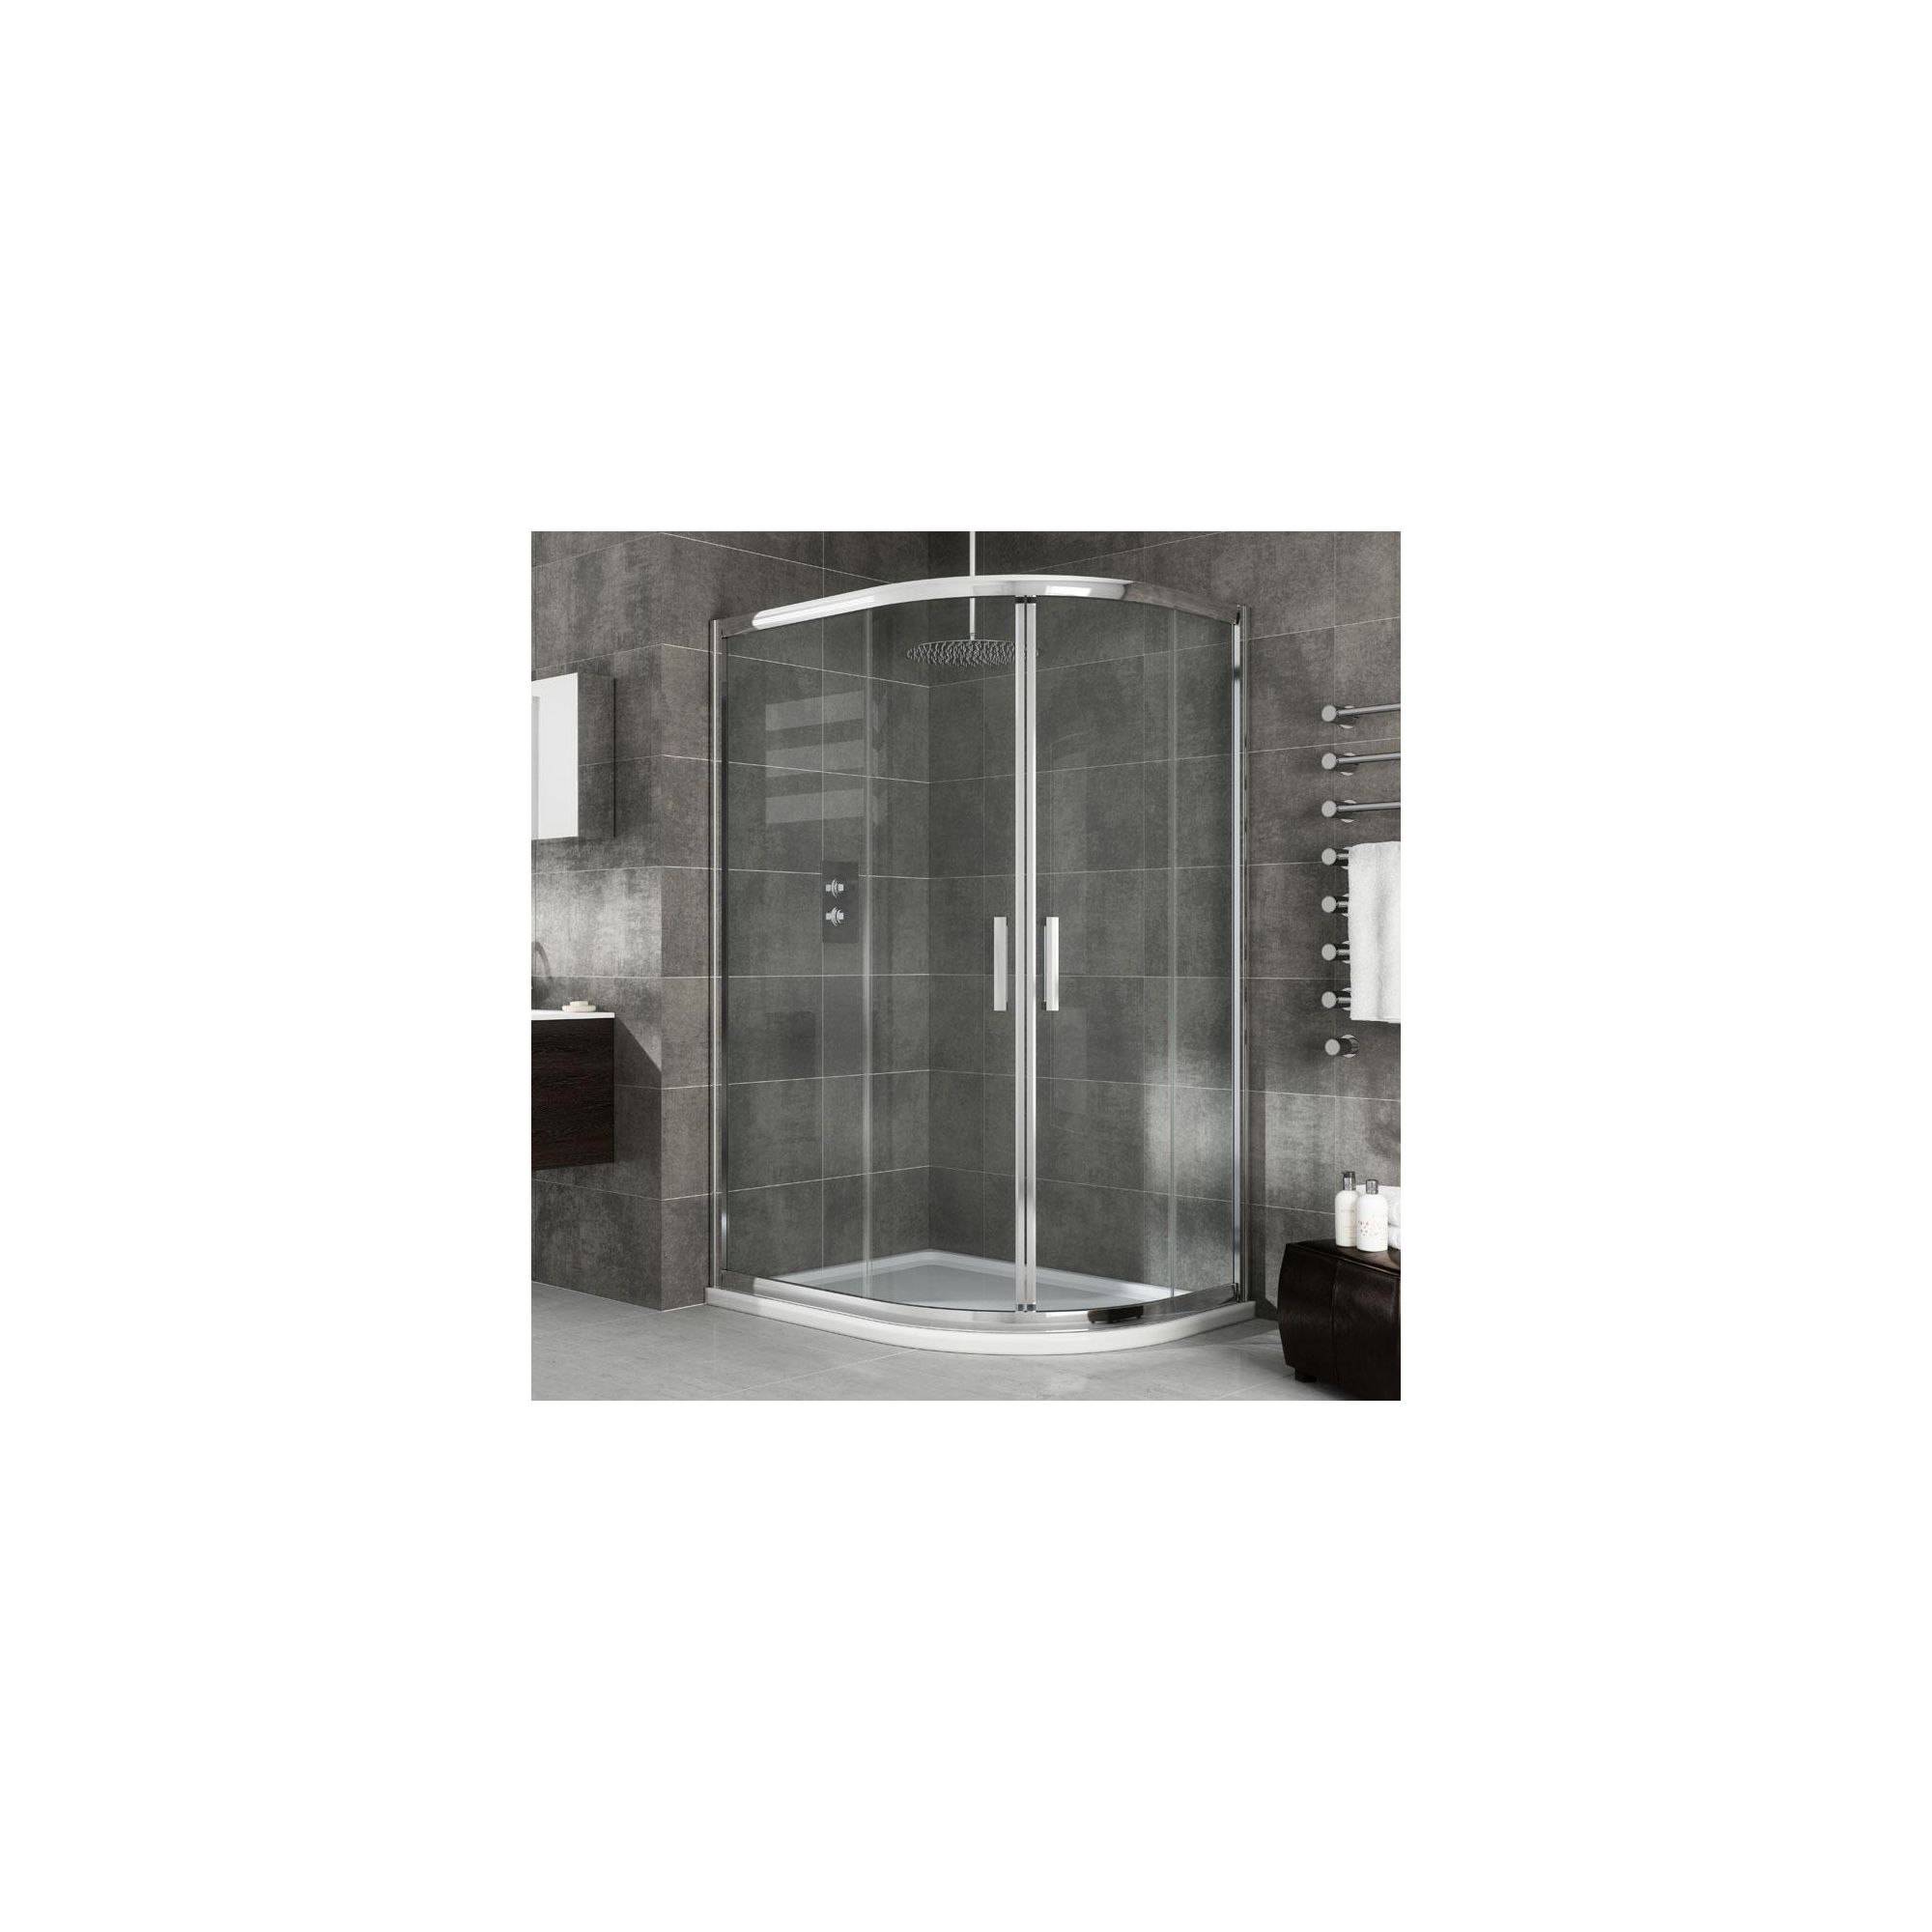 Elemis Eternity Offset Quadrant Shower Enclosure, 1200mm x 800mm, 8mm Glass, Low Profile Tray, Left Handed at Tesco Direct